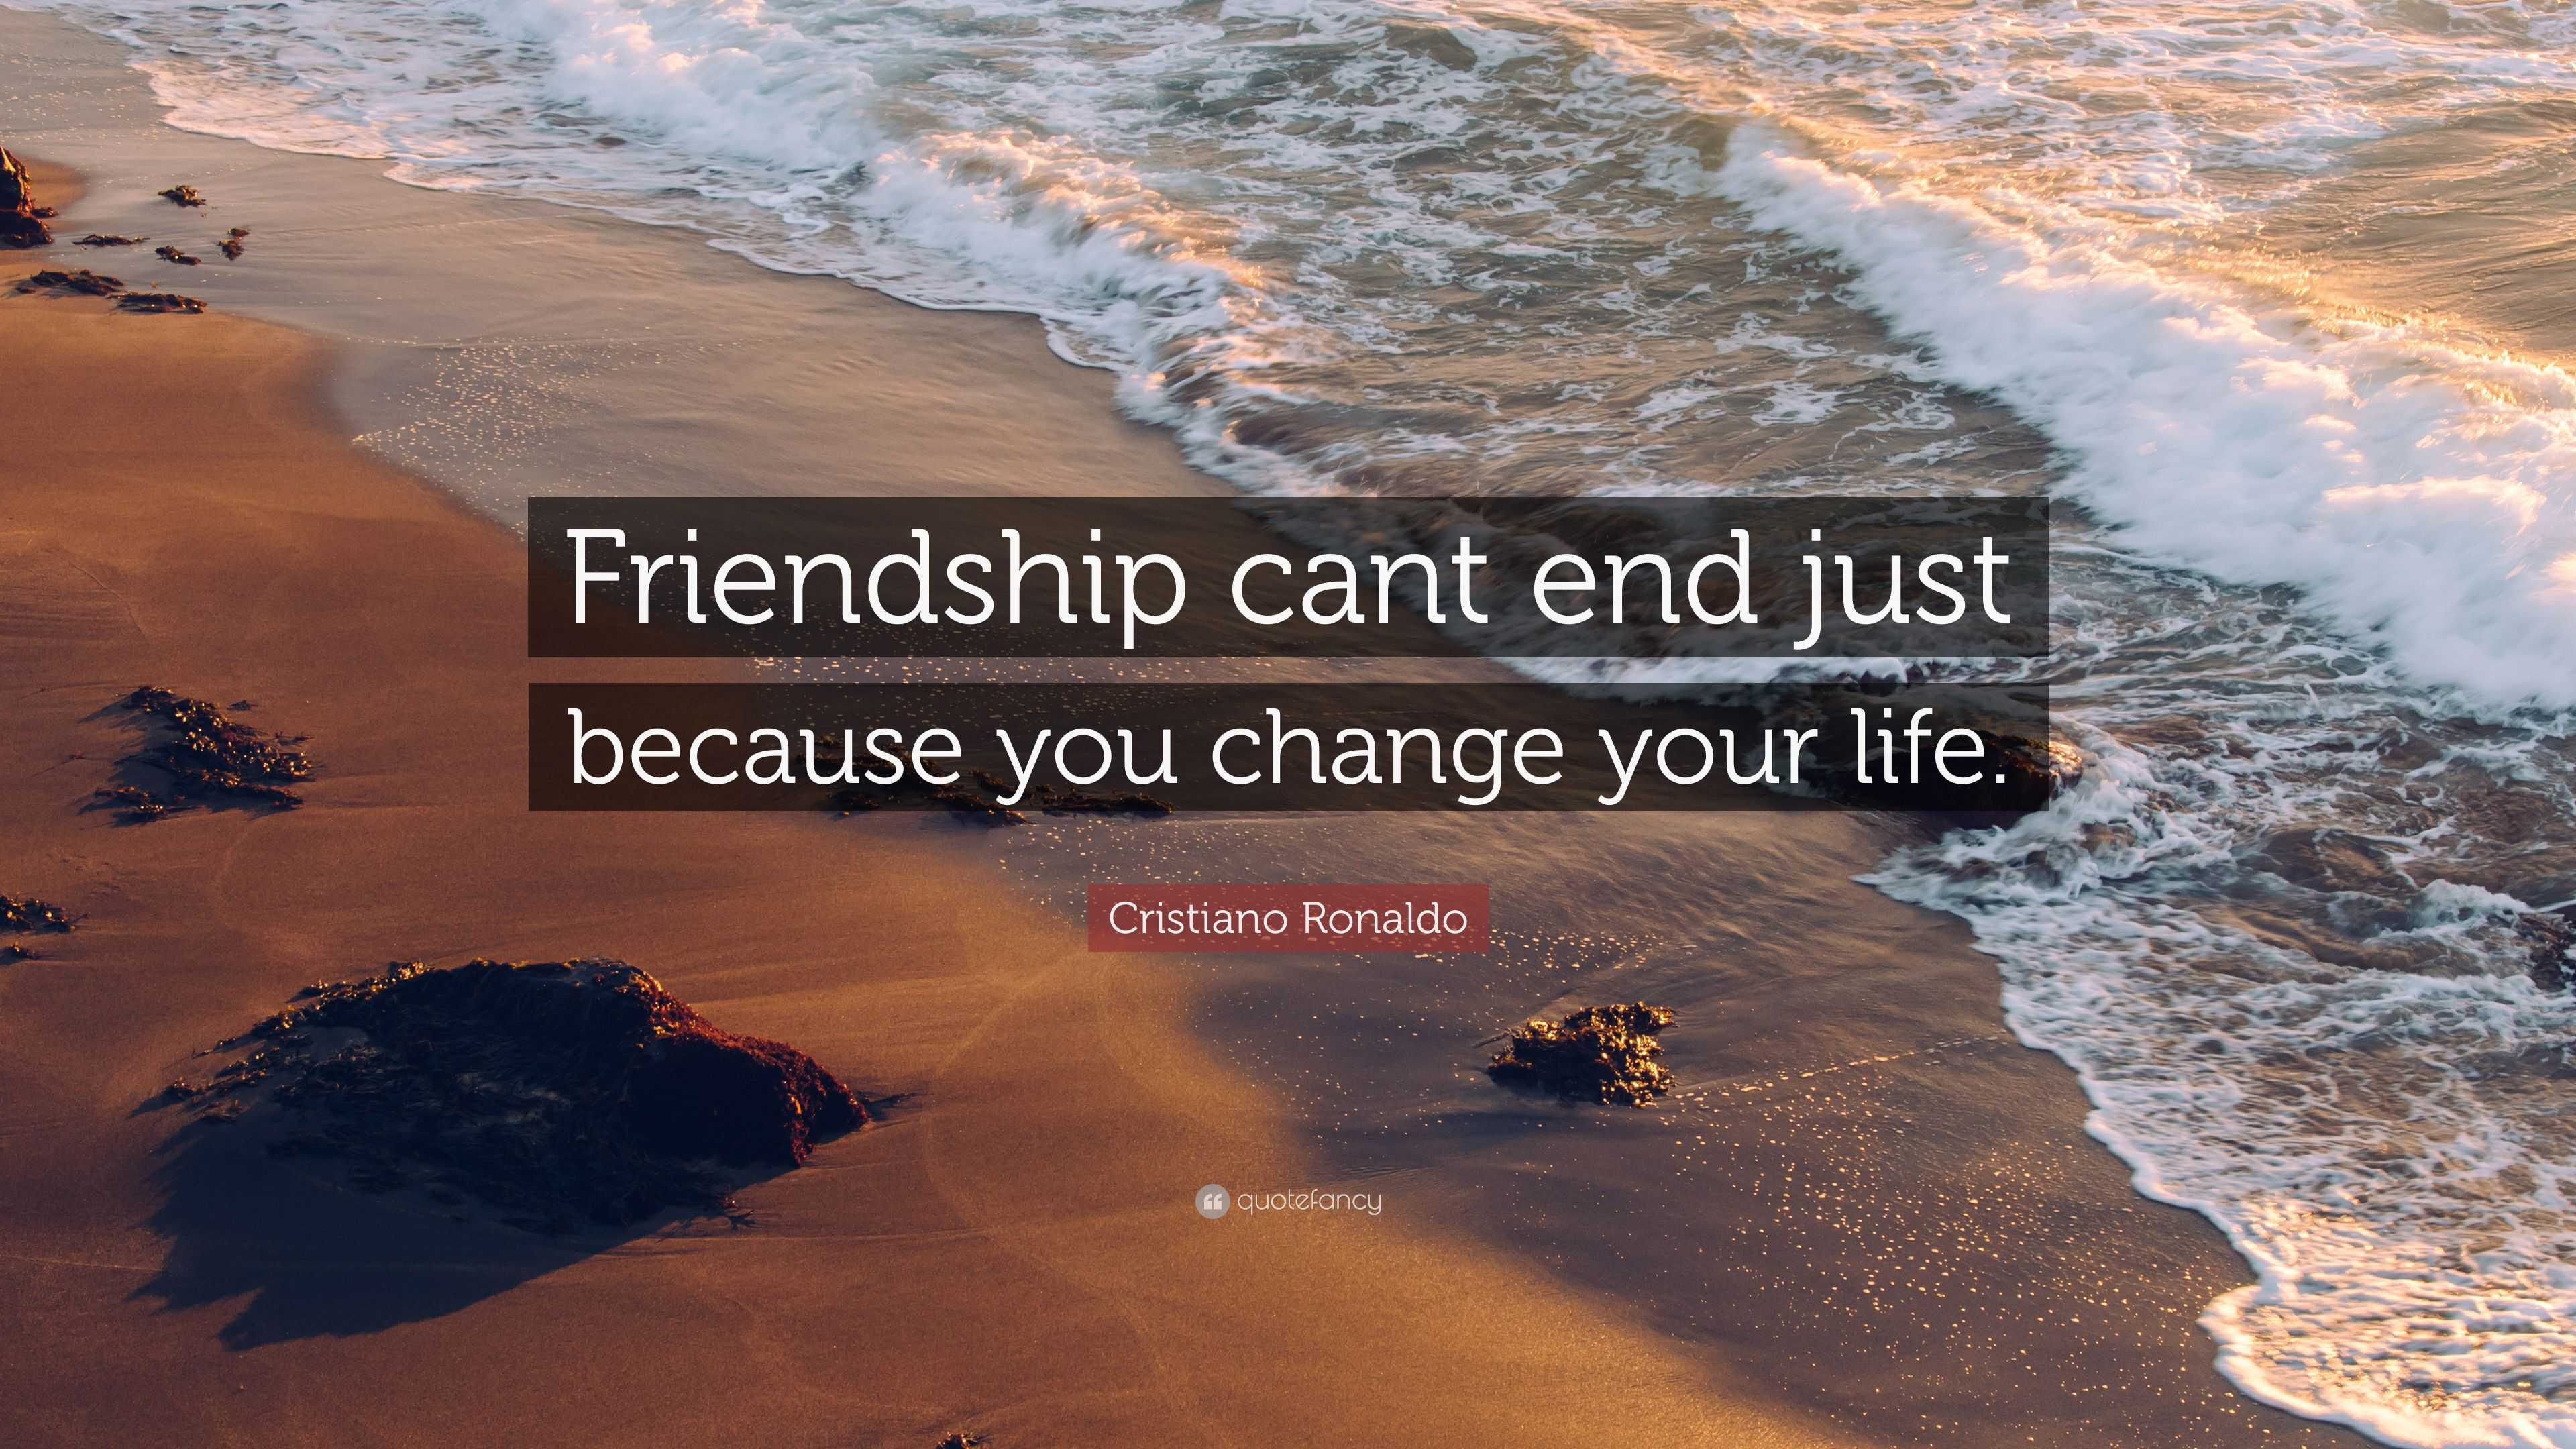 Cristiano Ronaldo Quote “Friendship cant end just because you change your life ”